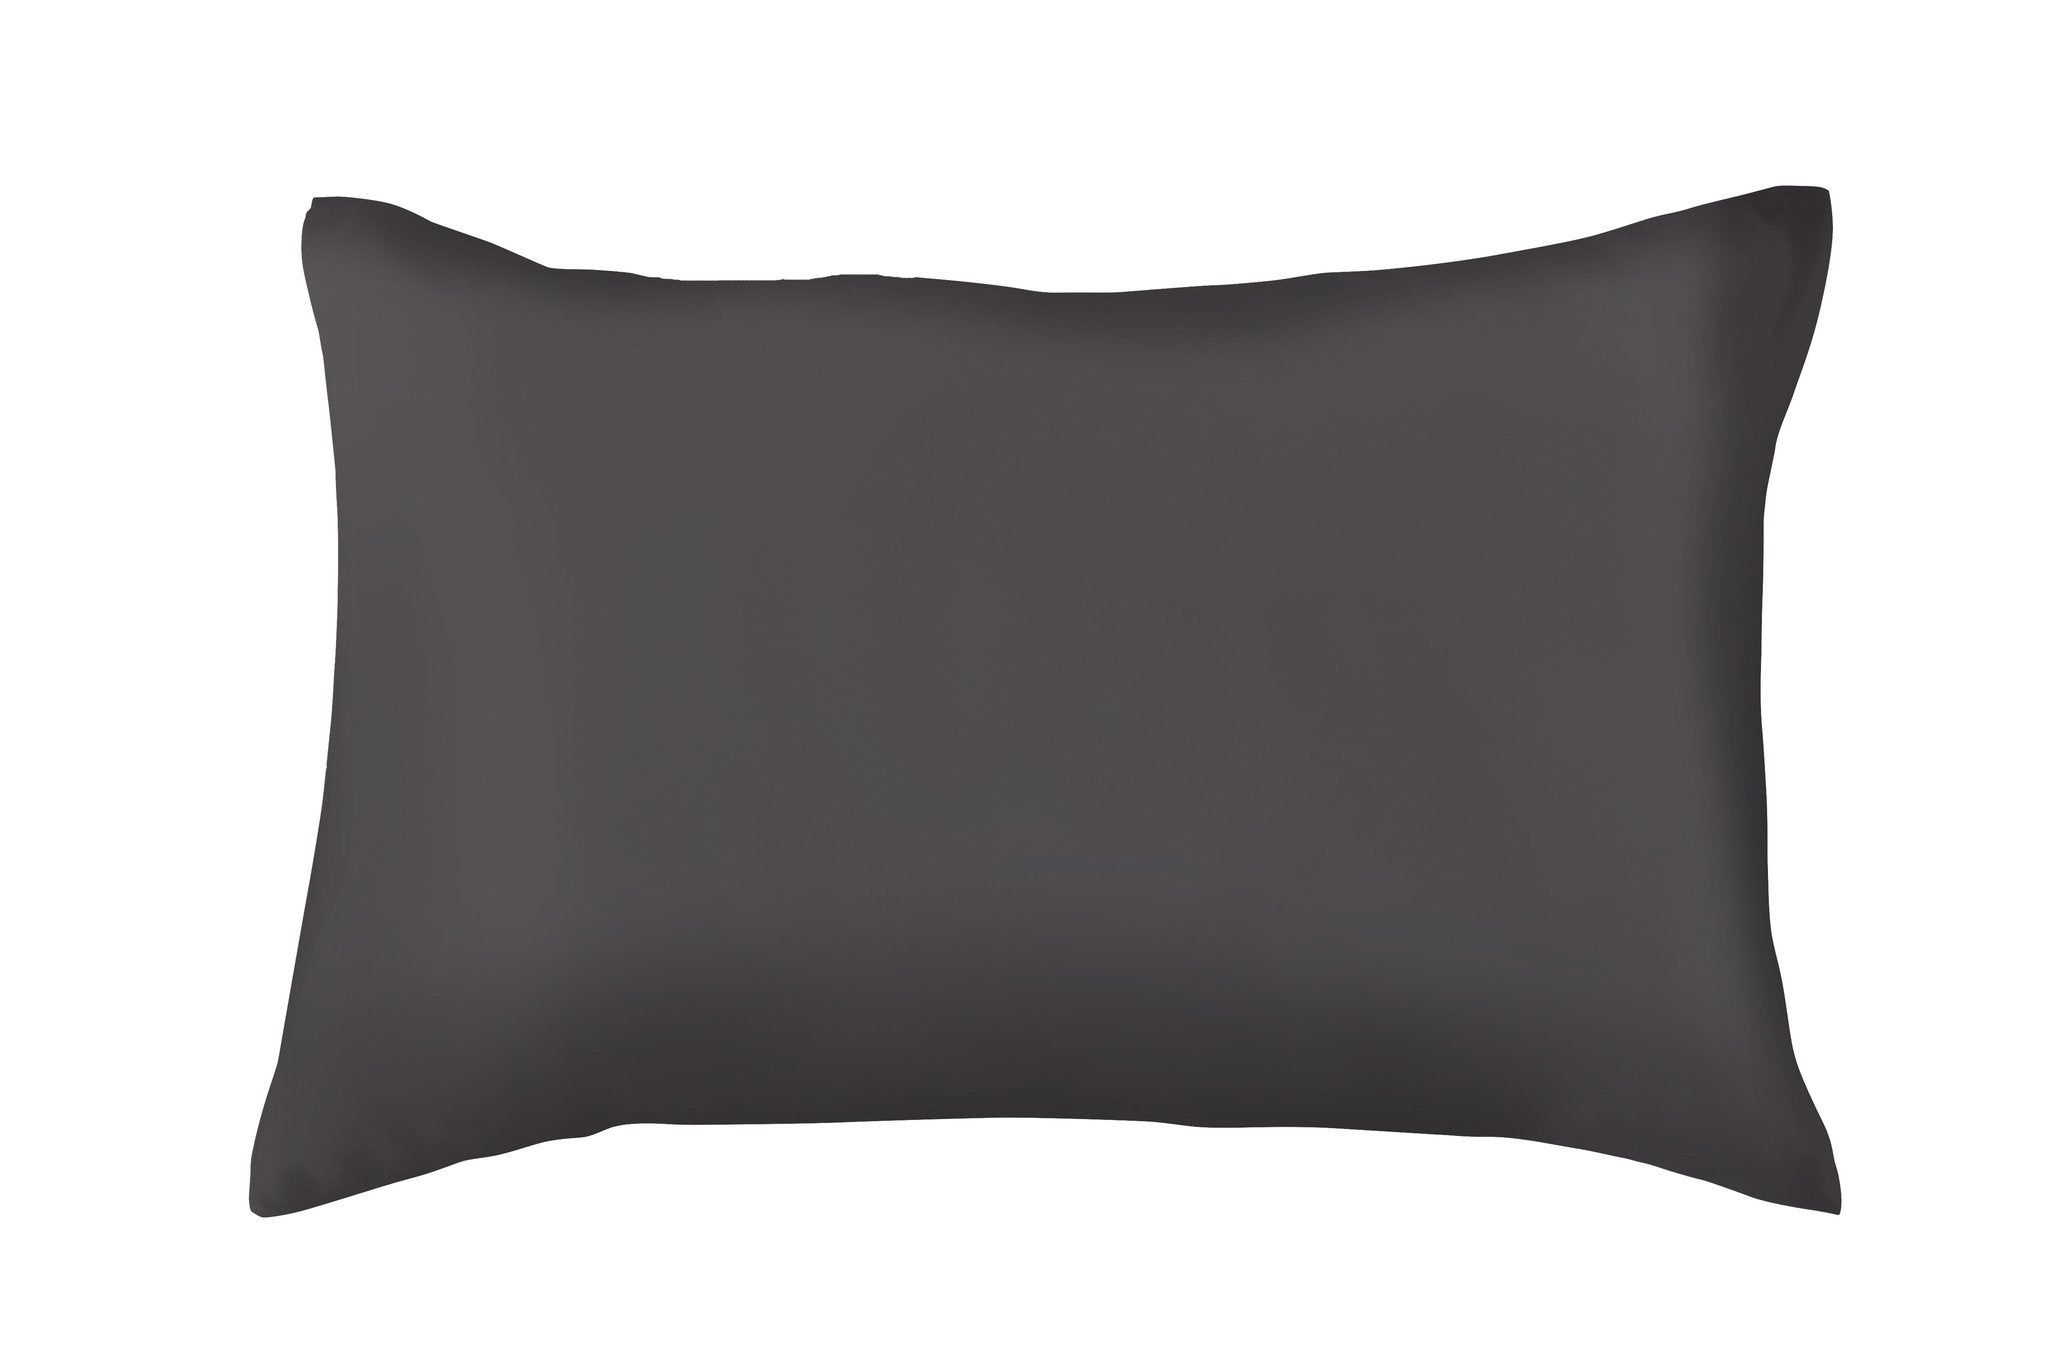 100% Pure Mulberry Silk Pillowcase- color Charcoal - $85.00